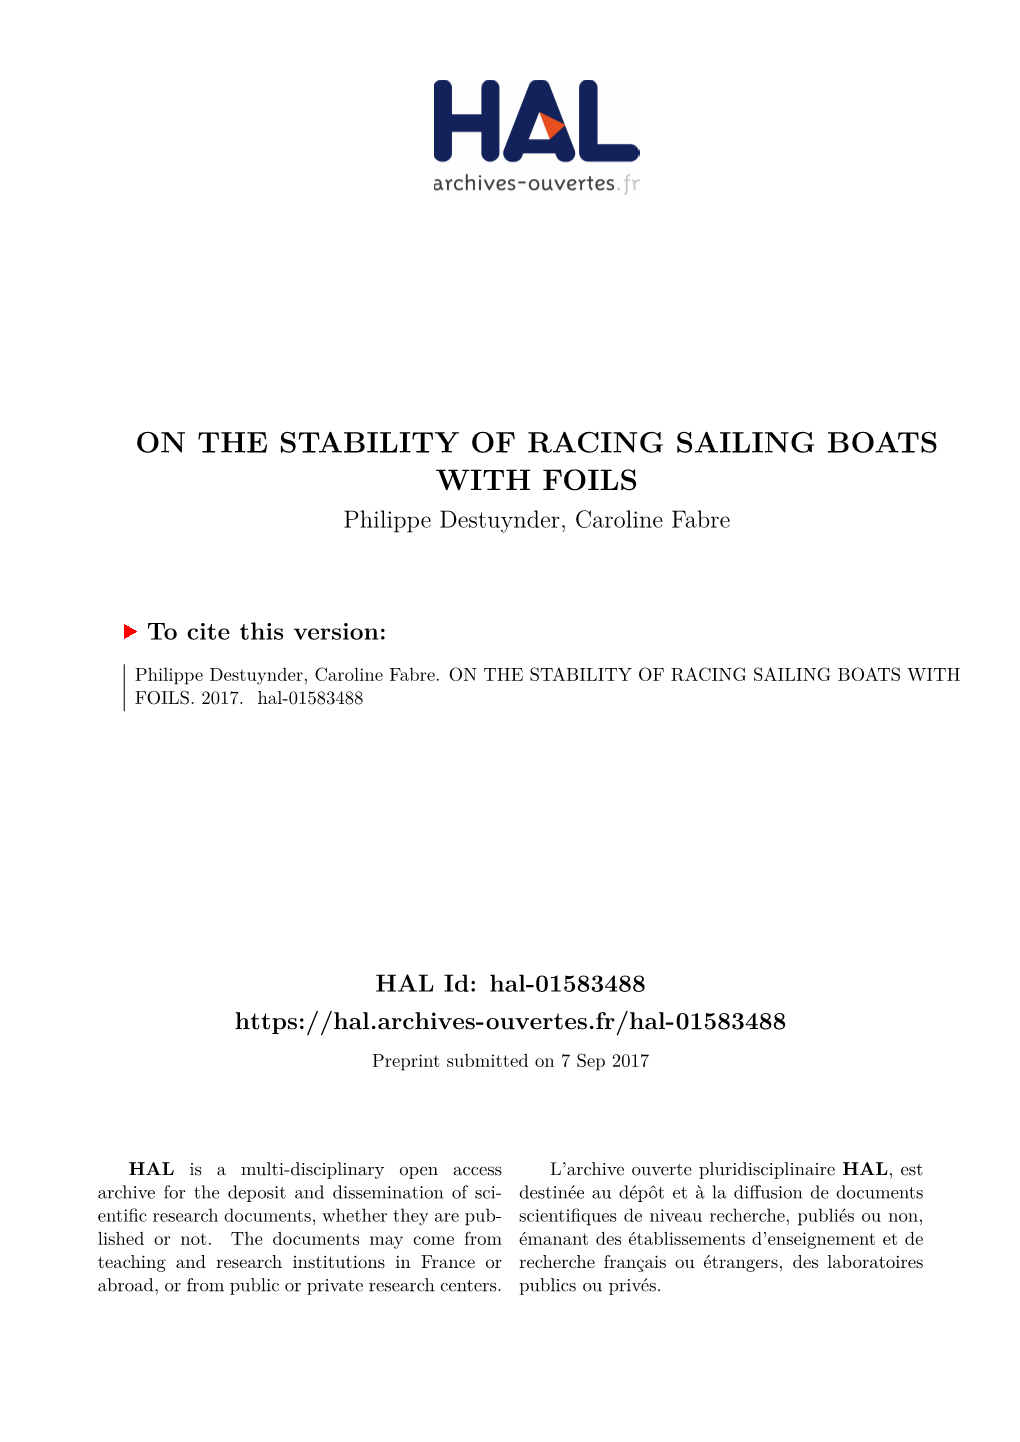 ON the STABILITY of RACING SAILING BOATS with FOILS Philippe Destuynder, Caroline Fabre